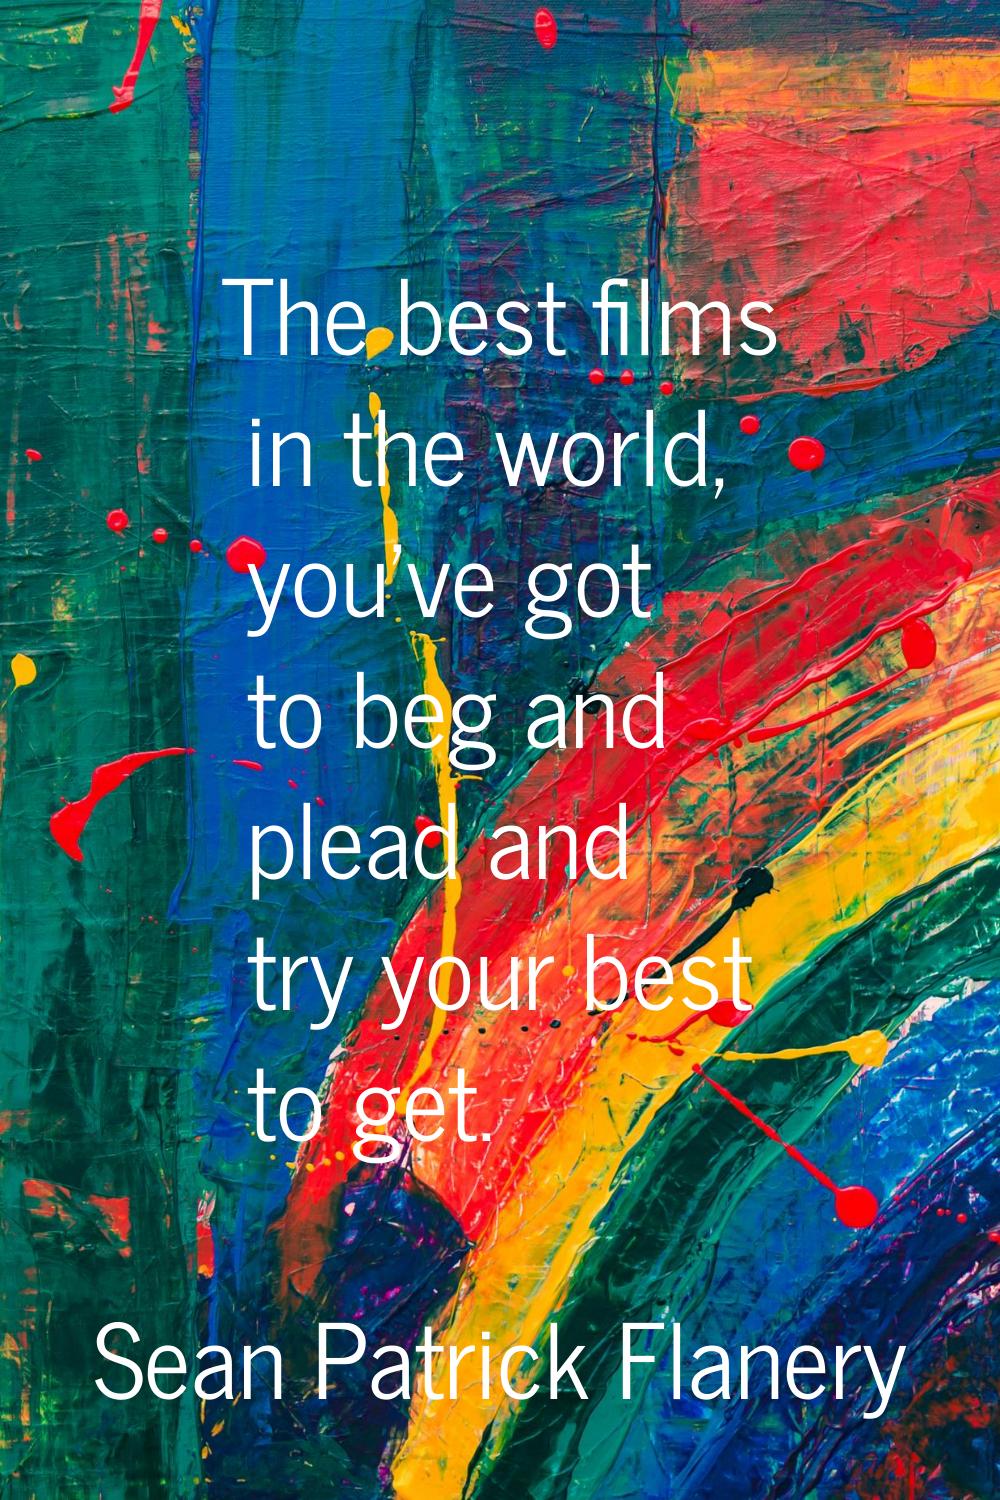 The best films in the world, you've got to beg and plead and try your best to get.